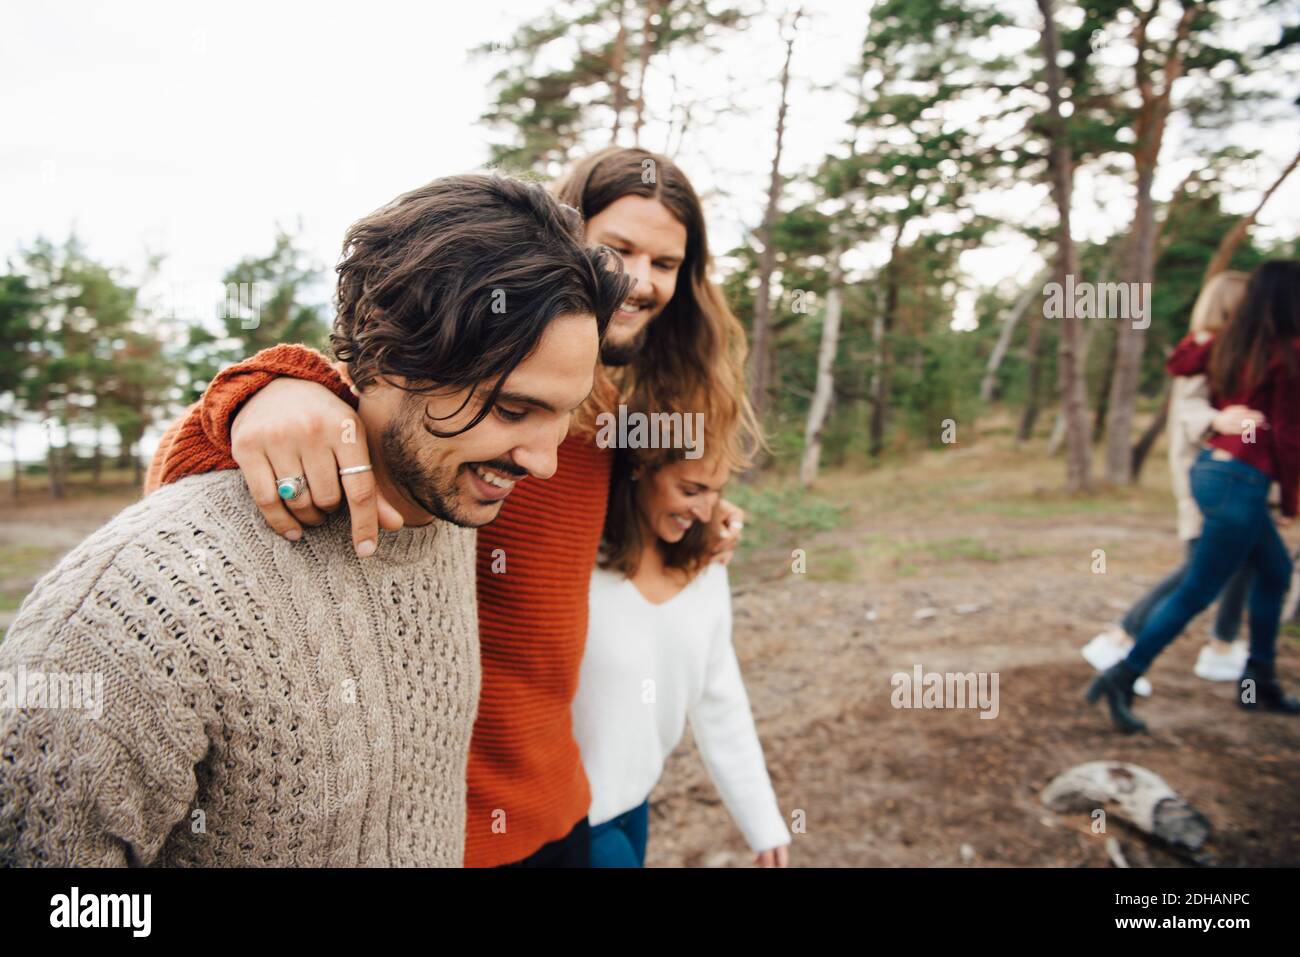 Cheerful man walking with friends in forest Stock Photo